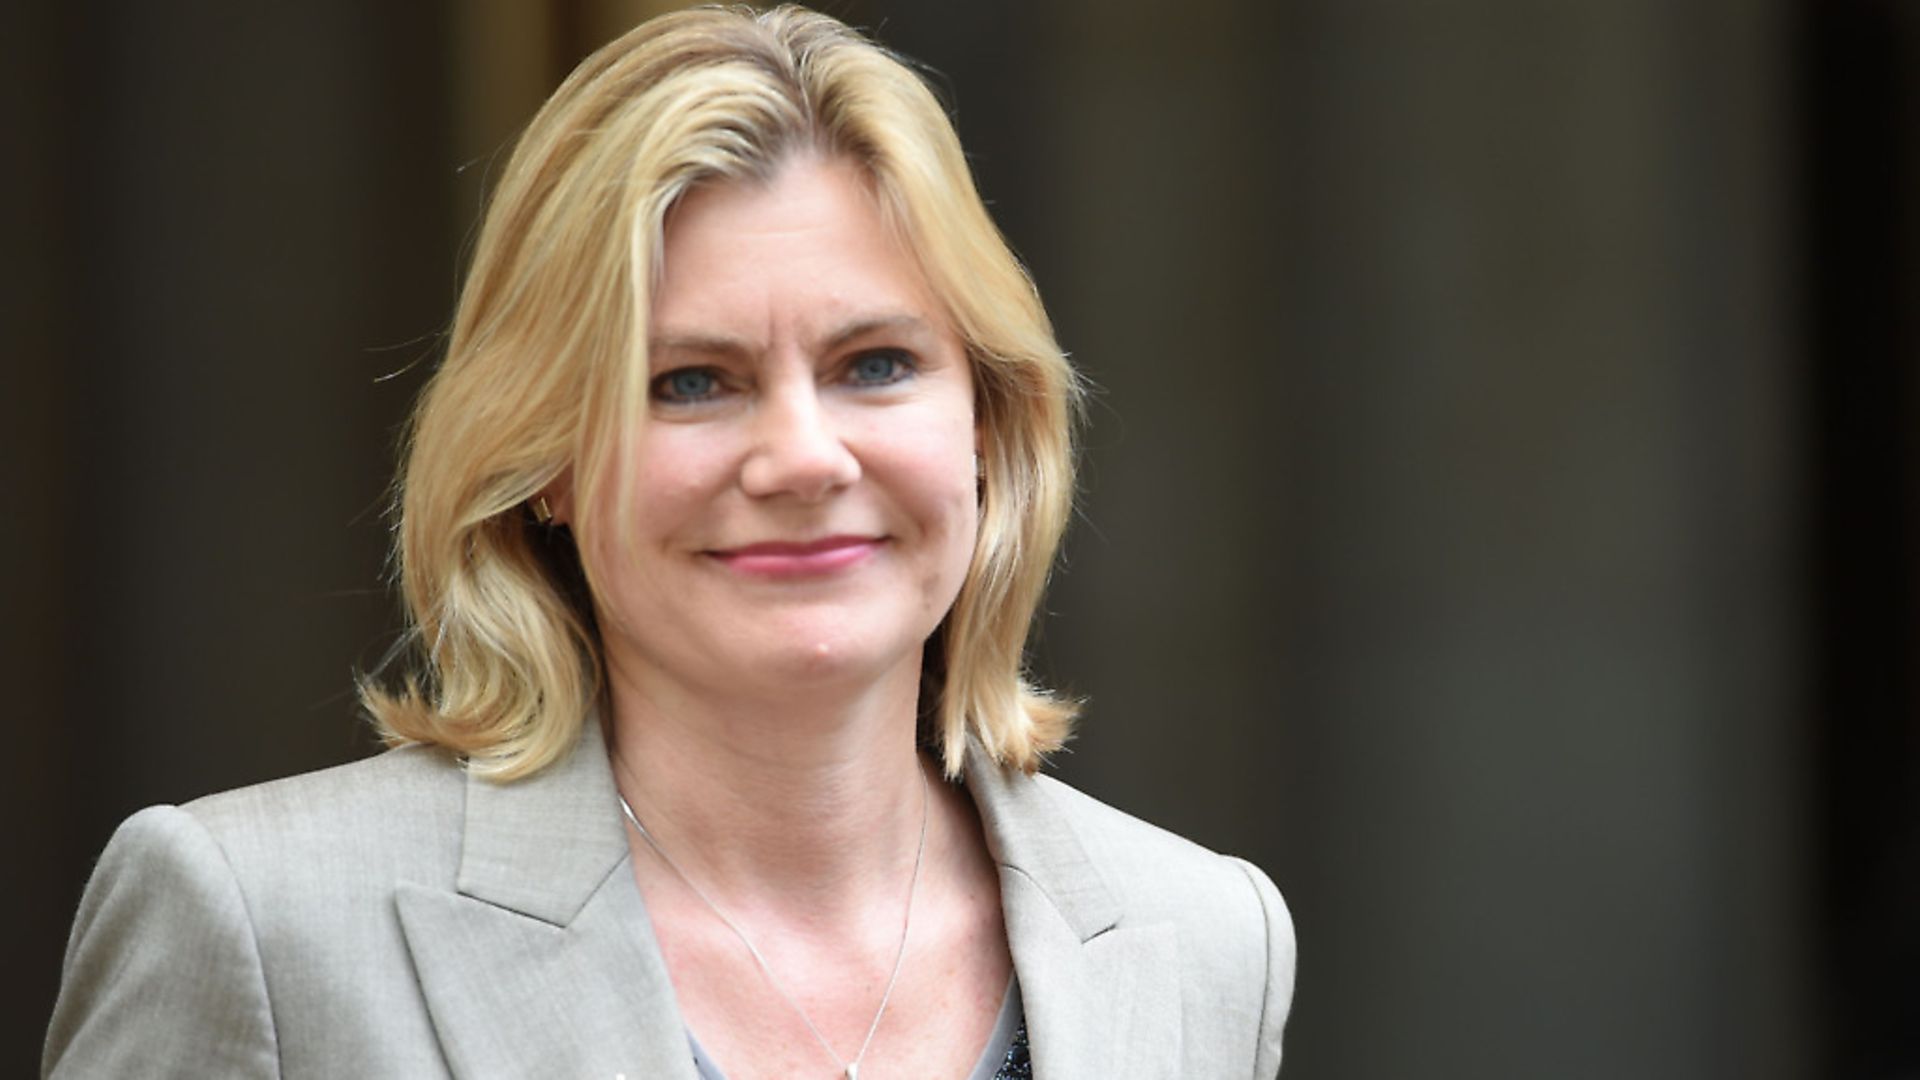 Justine Greening, who has said she could be prepared to run for the Tory leadership if Theresa May resigns or is forced out. Photograph: David Mirzoeff/PA Wire - Credit: PA